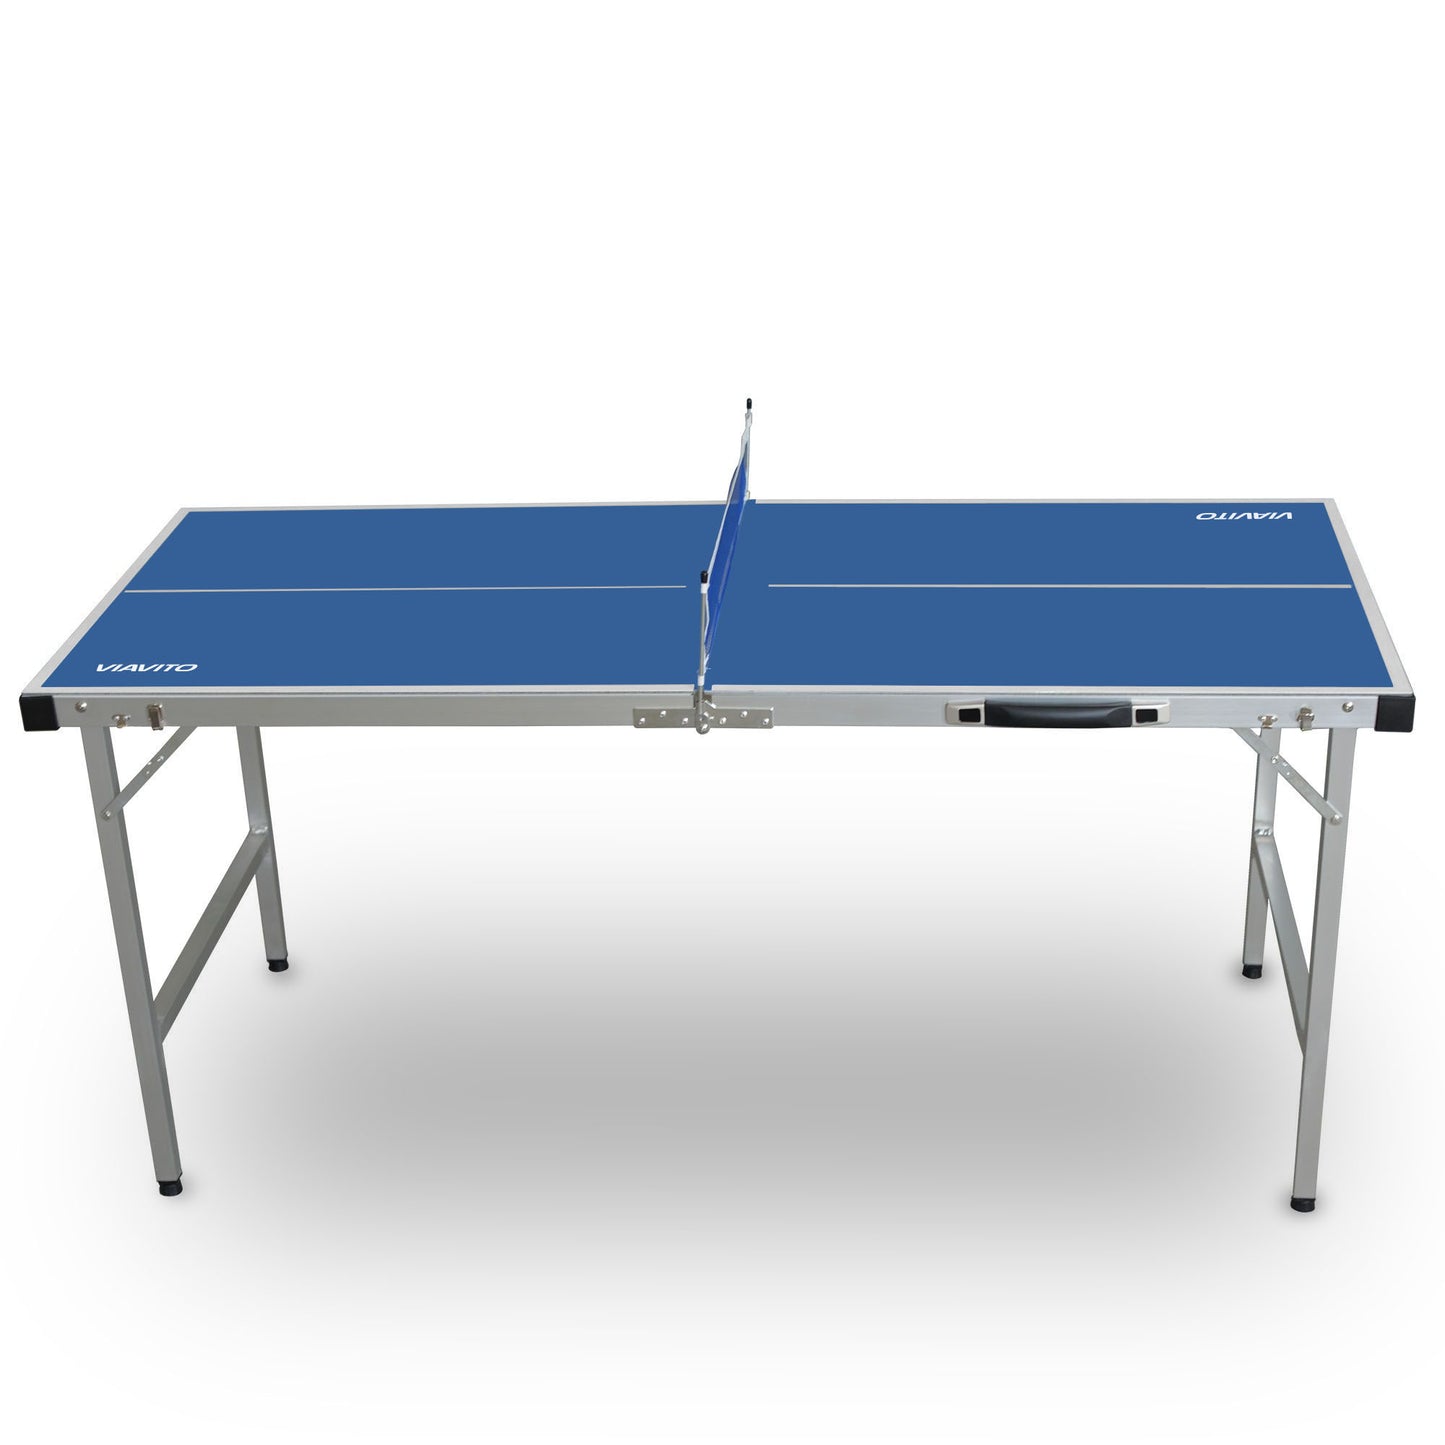 |Viavito PlayCase Table Tennis Table - Side - New |